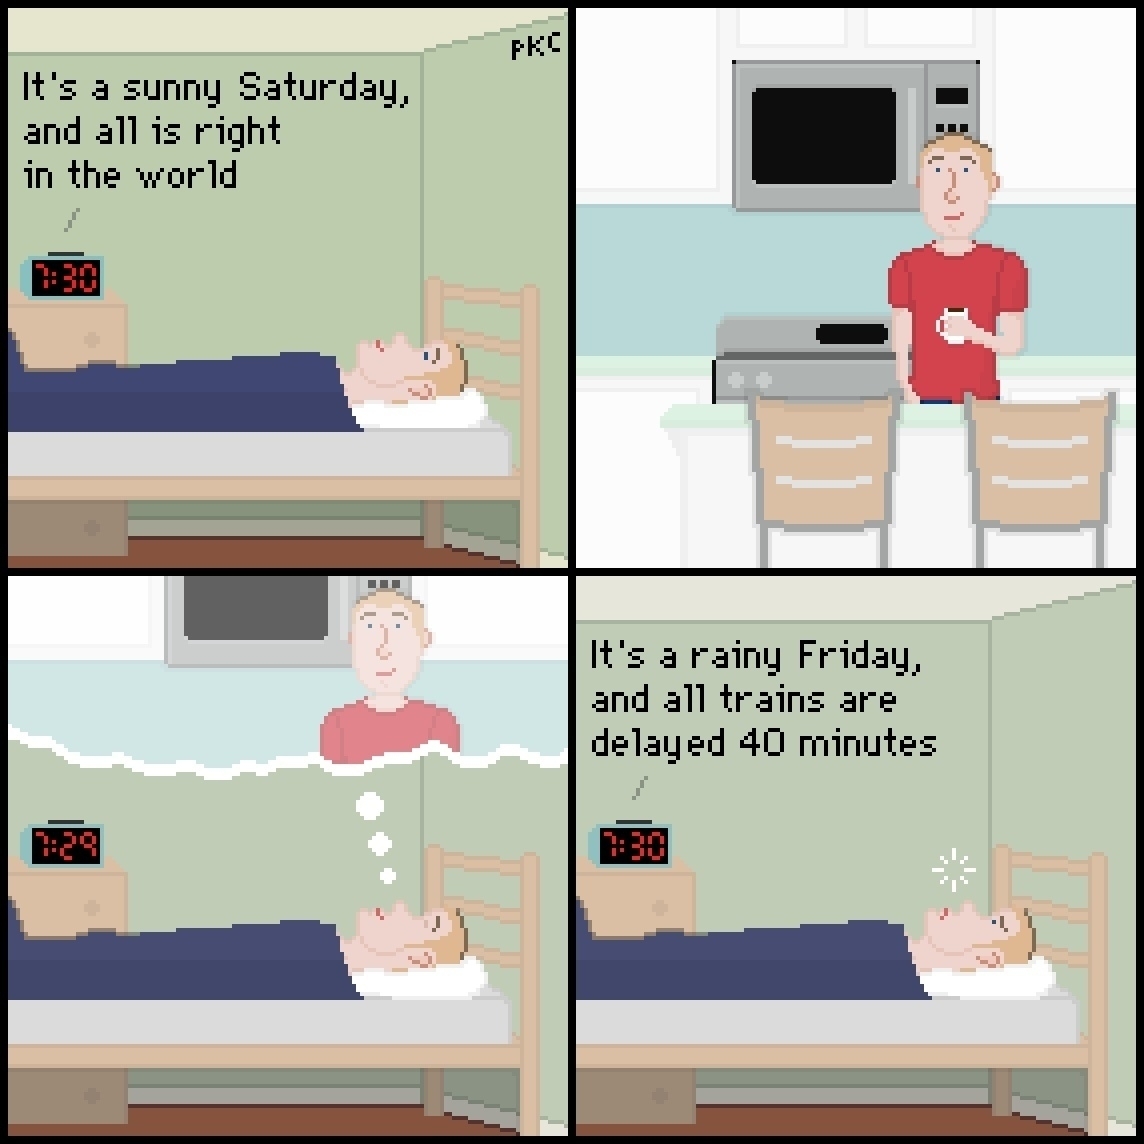 Panel 1: man is smiling in bed while alarm clock ringing at 7:30 says “it’s a sunny Saturday and all is right in the world. Panel 2: man is enjoying a morning cup of coffee in the kitchen. Panel 3: man is sleeping in bed smiling, dreaming of that morning coffee. The clock says 7:29. Panel 4: man is scowling in bed while alarm clock ringing at 7:30 says “it’s a rainy Friday and all trains are delayed 40 minutes.”